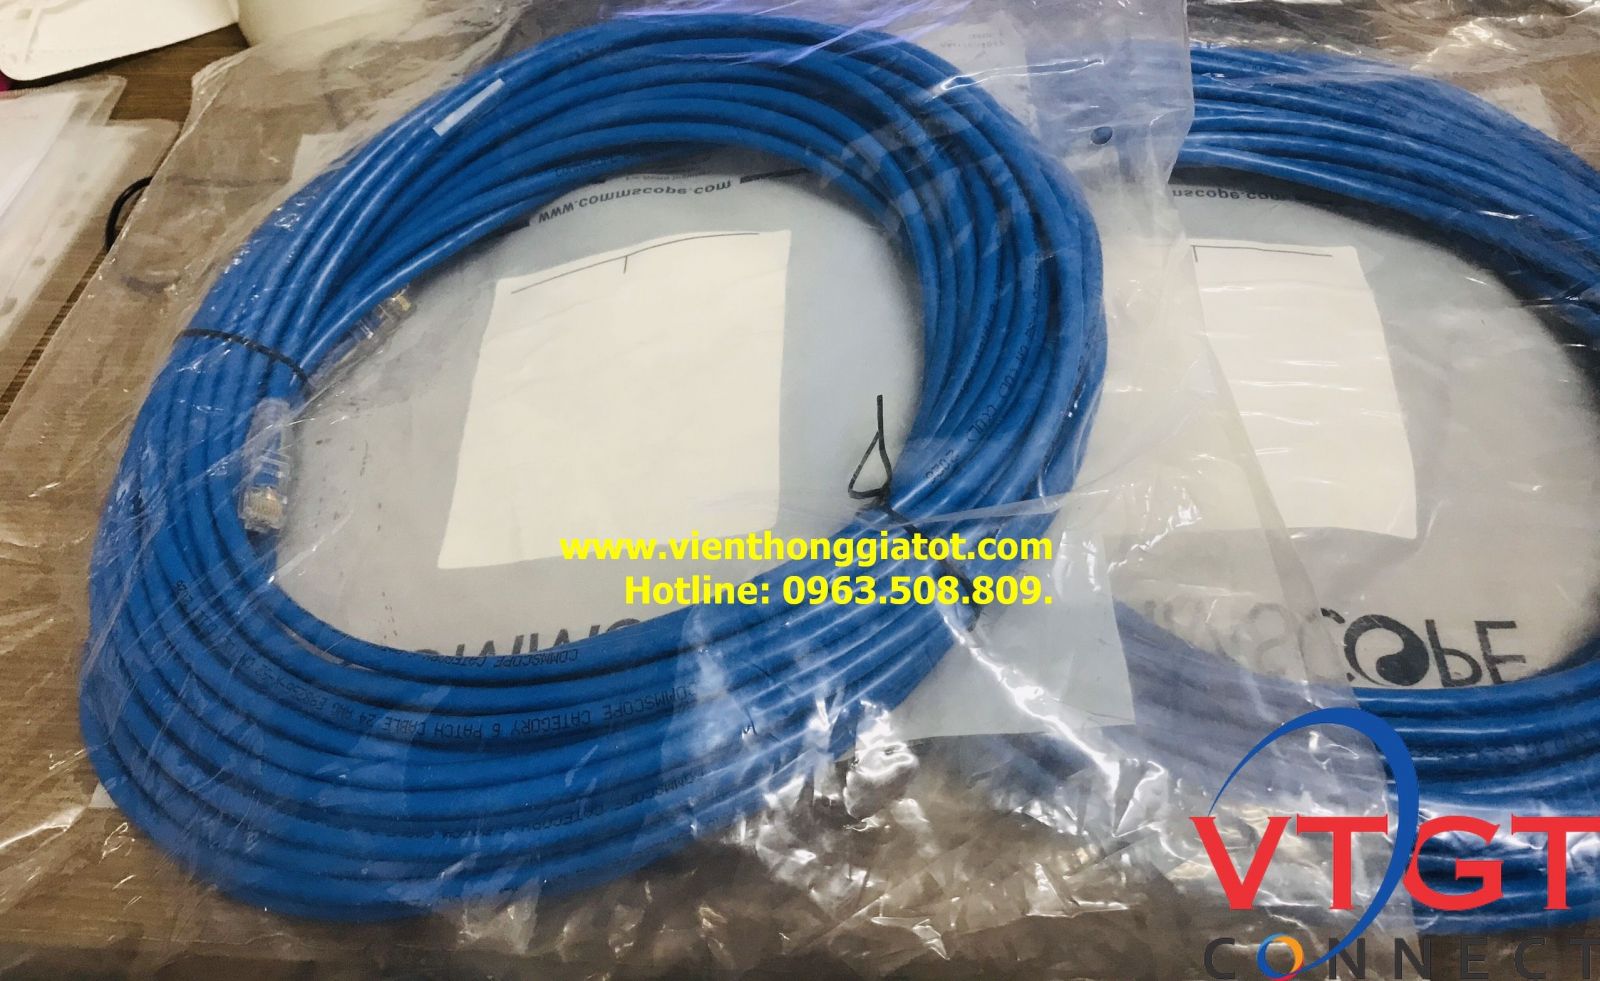 anh-day-nhay-mang-commscope-cat6-10m